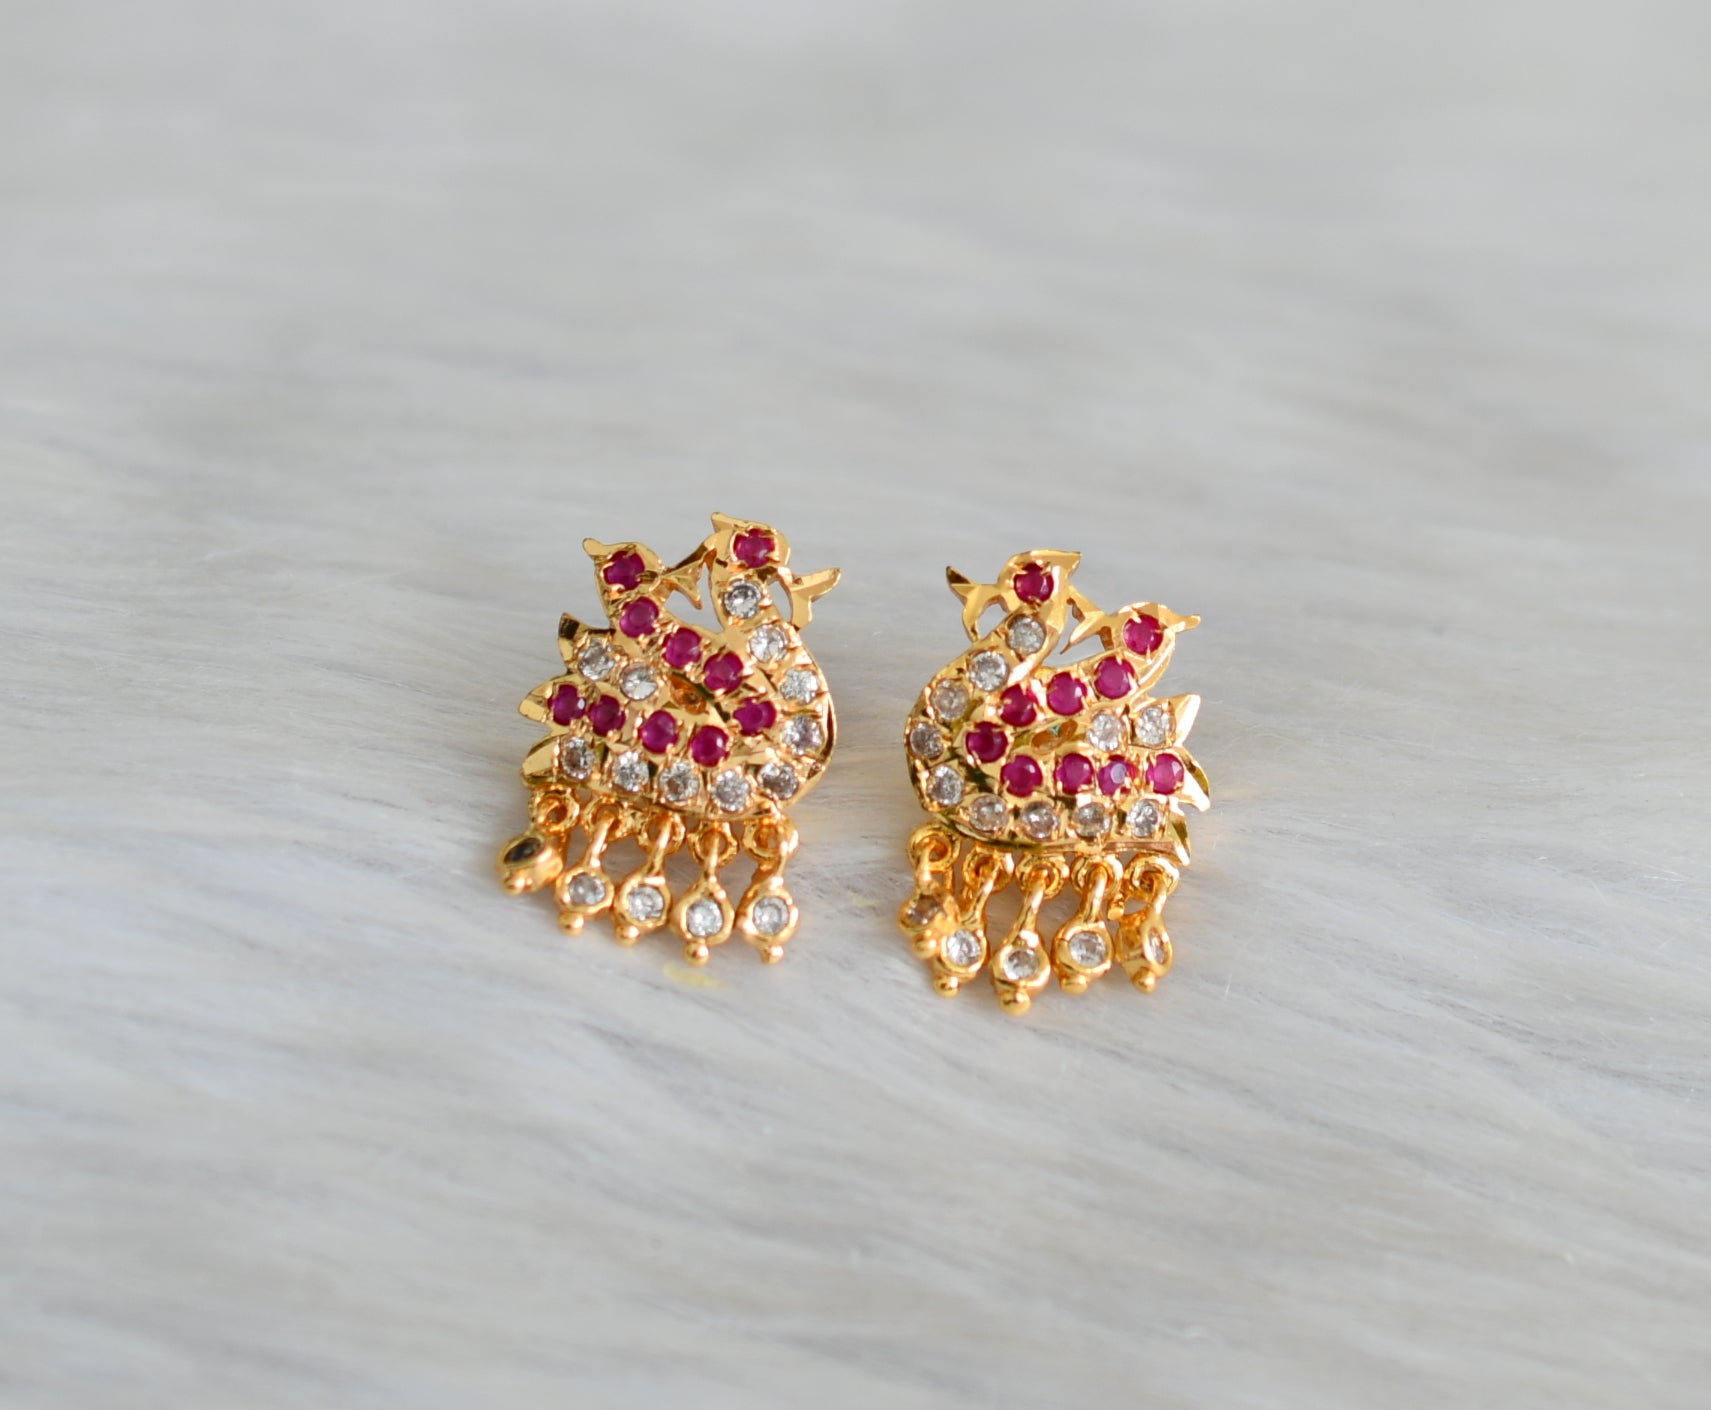 Indian Gold Plated Bollywood Style 925 Sterling Silver Zirconia Earrings  Set | eBay